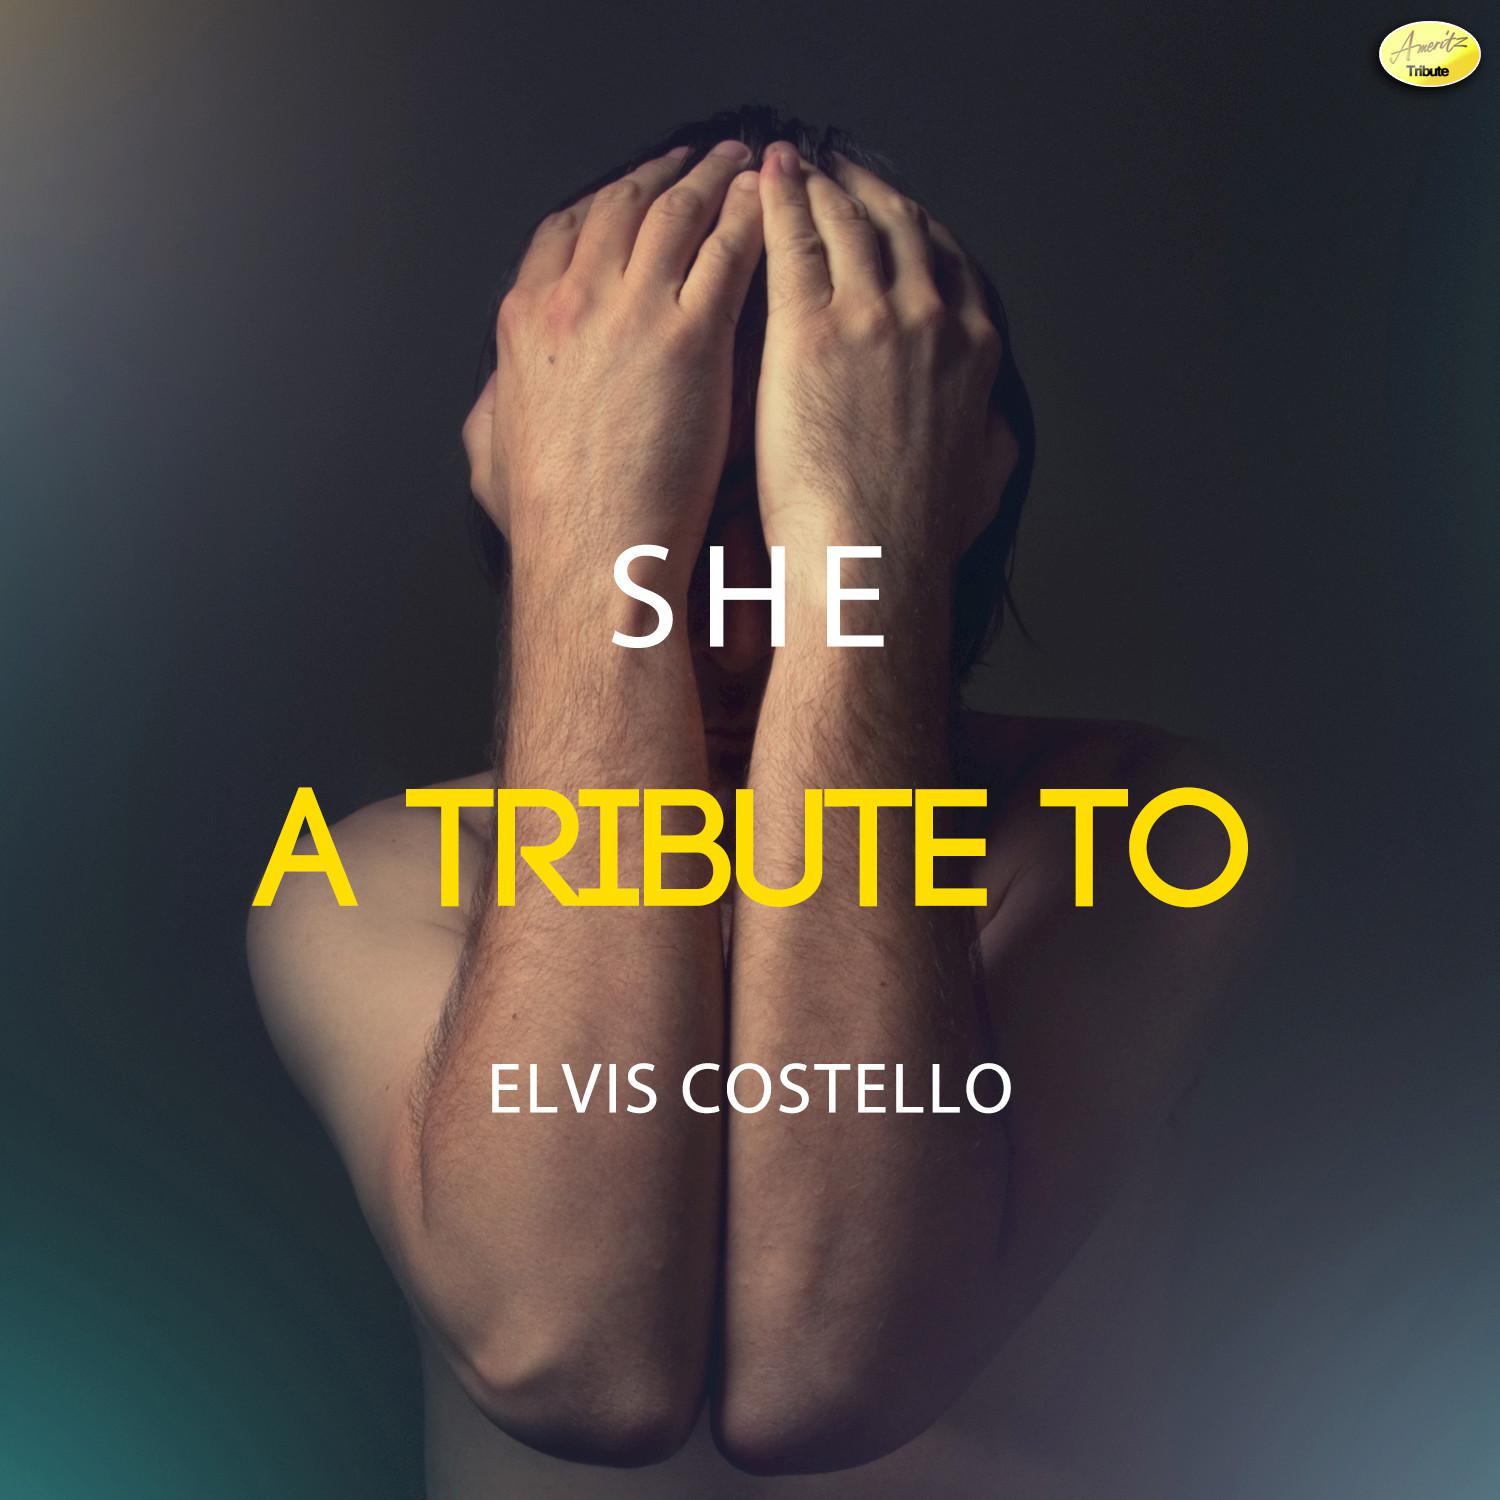 She - A Tribute to Elvis Costello